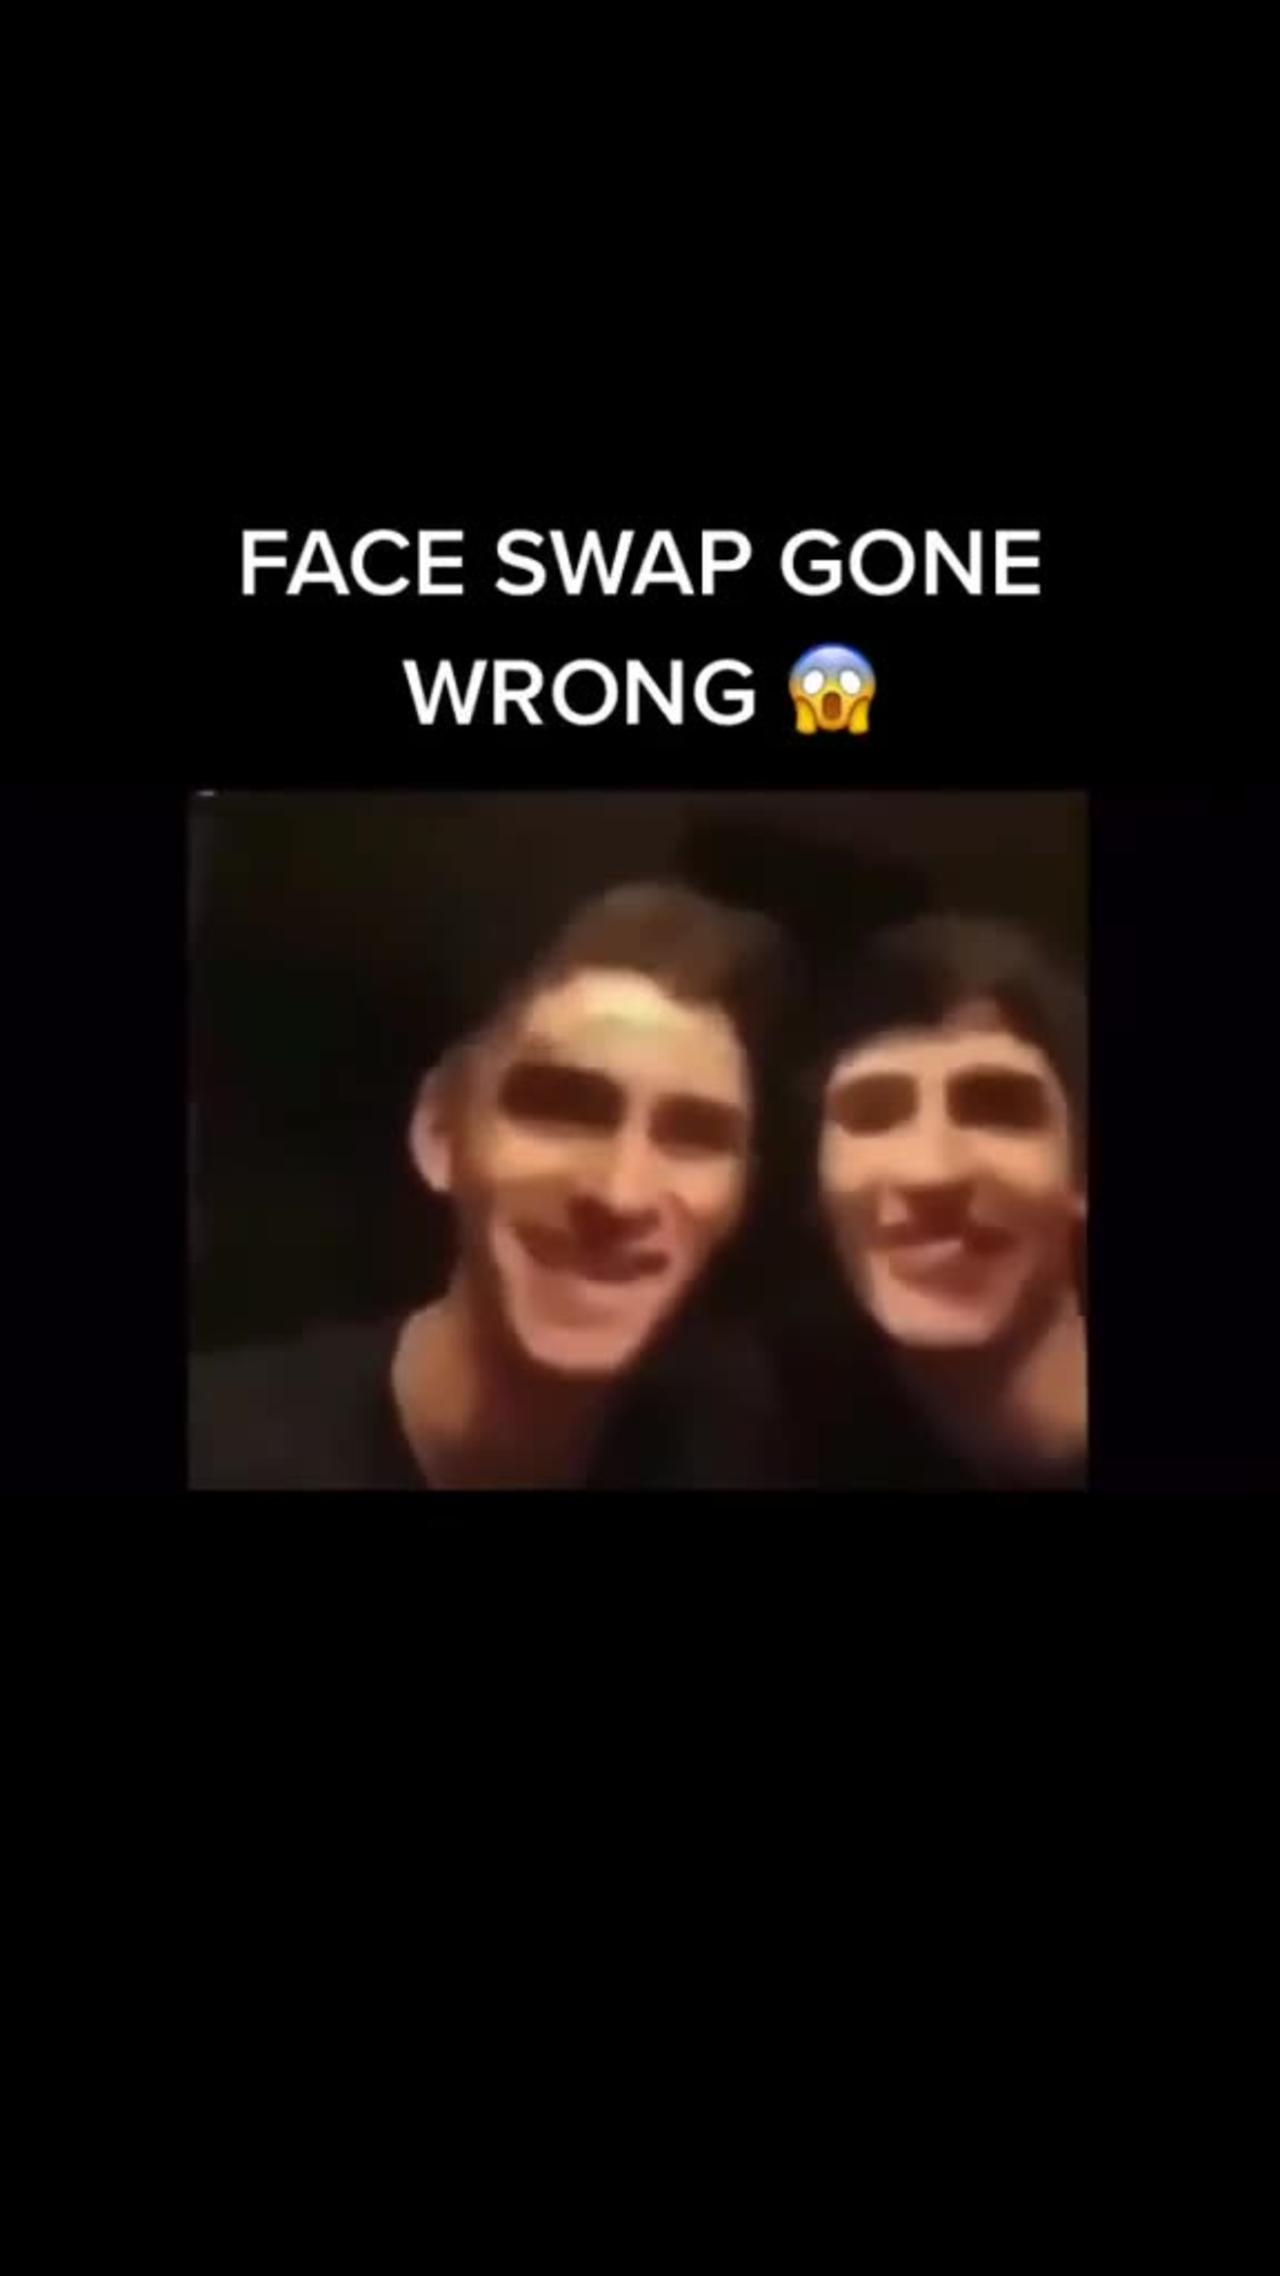 Face swap gone wrong 😳